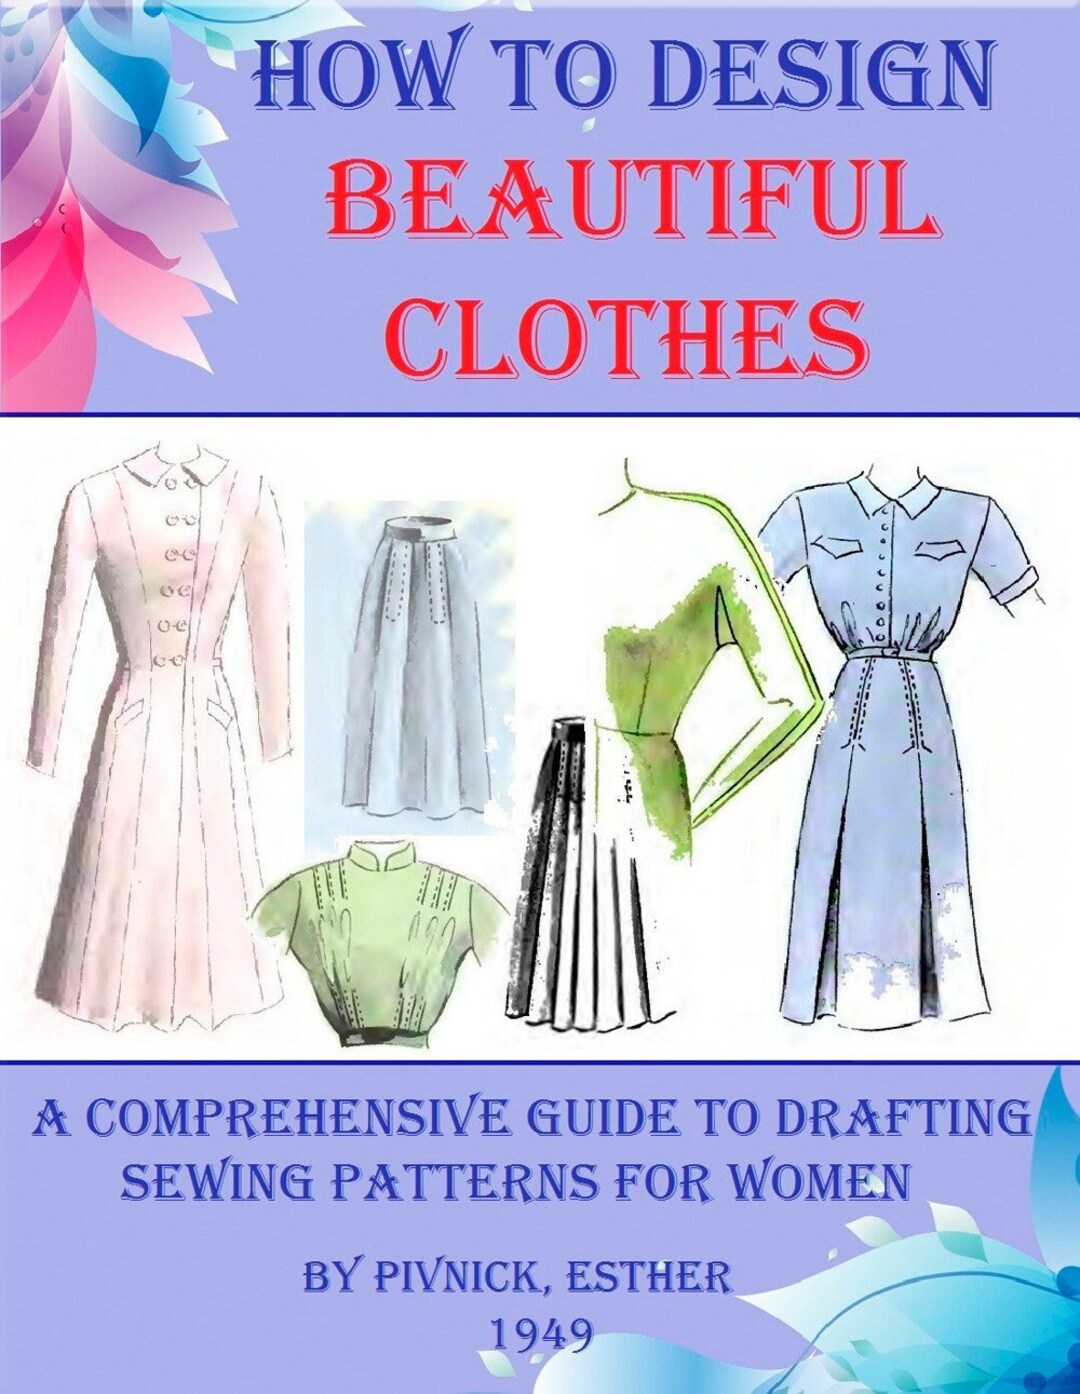 1940s Sewing Patternpattern Draftingpdf Ebookhow to Design - Etsy